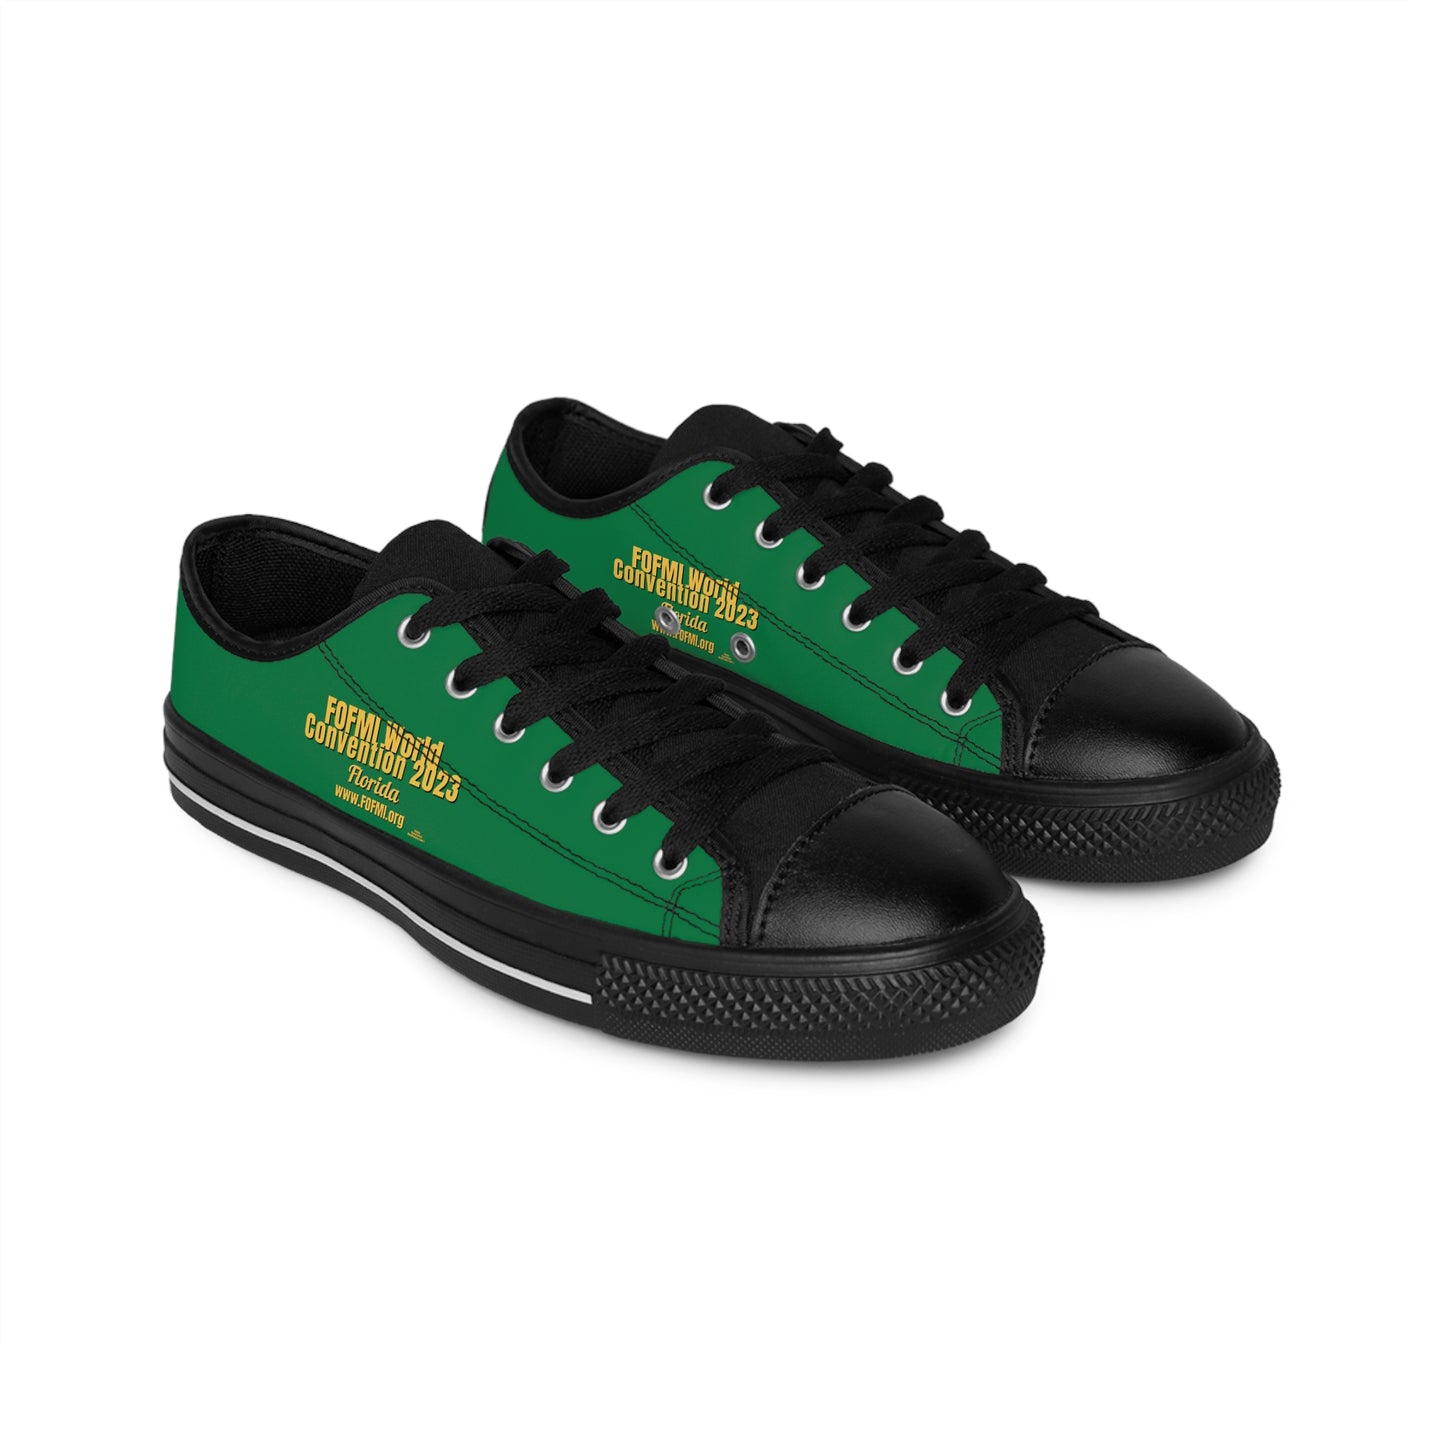 FOFMI WORLD CONVENTION 2023 Men's Sneakers (Green)